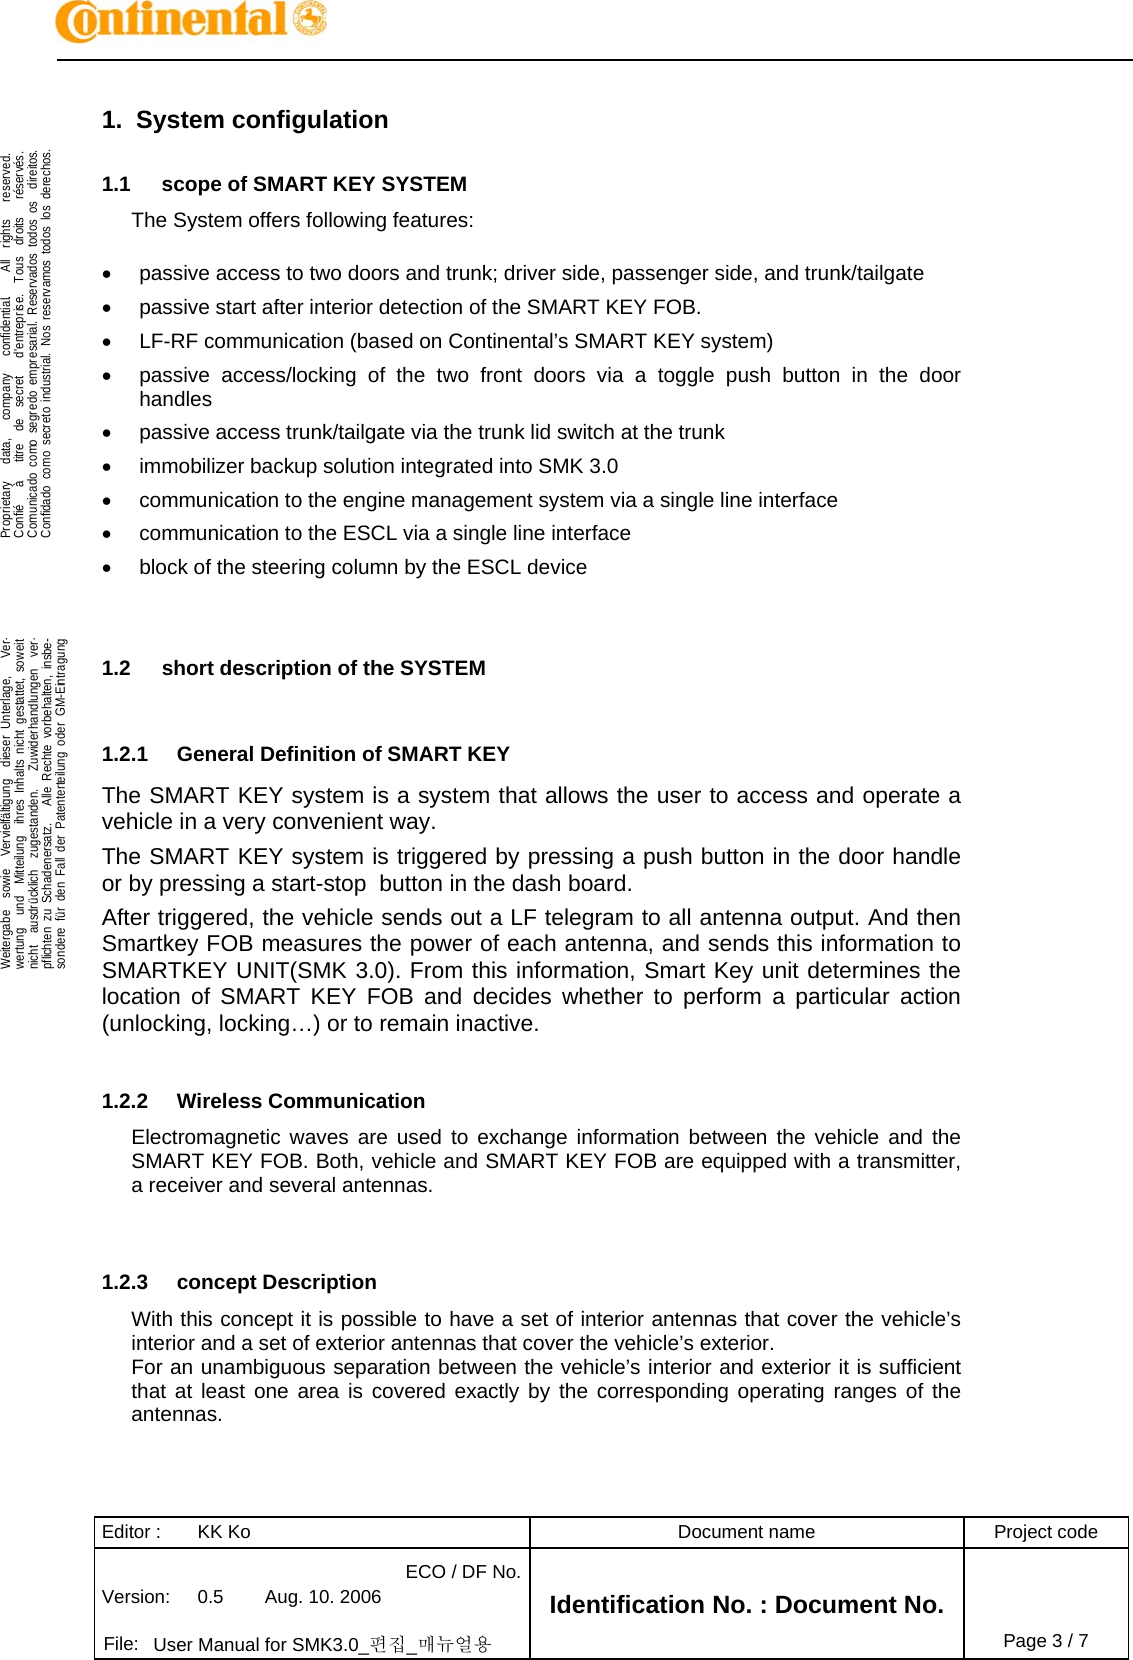 Editor :  KK Ko  Document name  Project code Version:  0.5  Aug. 10. 2006 ECO / DF No.Identification No. : Document No.   File:  User Manual for SMK3.0_편집_매뉴얼용 Page 3 / 7   .Proprietary   data,   company   confidential.    All  rights   reserved.Confié   à   titre  de  secret   d&apos;entreprise.  Tous  droits   réservés.Comunicado como segredo empresarial. Reservados todos os  direitos.Confidado como secreto industrial. Nos reservamos todos los derechos.  .Weitergabe  sowie  Vervielfältigung  dieser Unterlage,   Ver-wertung  und  Mitteilung  ihres Inhalts nicht gestattet, soweitnicht  ausdrücklich  zugestanden.   Zuwiderhandlungen  ver-pflichten zu Schadenersatz.   Alle Rechte vorbehalten, insbe-sondere für den Fall der Patenterteilung oder GM-Eintragung  1. System configulation 1.1  scope of SMART KEY SYSTEM The System offers following features:    passive access to two doors and trunk; driver side, passenger side, and trunk/tailgate   passive start after interior detection of the SMART KEY FOB.   LF-RF communication (based on Continental’s SMART KEY system)   passive access/locking of the two front doors via a toggle push button in the door handles   passive access trunk/tailgate via the trunk lid switch at the trunk   immobilizer backup solution integrated into SMK 3.0   communication to the engine management system via a single line interface   communication to the ESCL via a single line interface   block of the steering column by the ESCL device   1.2  short description of the SYSTEM  1.2.1  General Definition of SMART KEY The SMART KEY system is a system that allows the user to access and operate a vehicle in a very convenient way.  The SMART KEY system is triggered by pressing a push button in the door handle or by pressing a start-stop  button in the dash board. After triggered, the vehicle sends out a LF telegram to all antenna output. And then Smartkey FOB measures the power of each antenna, and sends this information to SMARTKEY UNIT(SMK 3.0). From this information, Smart Key unit determines the location of SMART KEY FOB and decides whether to perform a particular action (unlocking, locking…) or to remain inactive.  1.2.2 Wireless Communication Electromagnetic waves are used to exchange information between the vehicle and the SMART KEY FOB. Both, vehicle and SMART KEY FOB are equipped with a transmitter, a receiver and several antennas.   1.2.3 concept Description With this concept it is possible to have a set of interior antennas that cover the vehicle’s interior and a set of exterior antennas that cover the vehicle’s exterior. For an unambiguous separation between the vehicle’s interior and exterior it is sufficient that at least one area is covered exactly by the corresponding operating ranges of the antennas.  